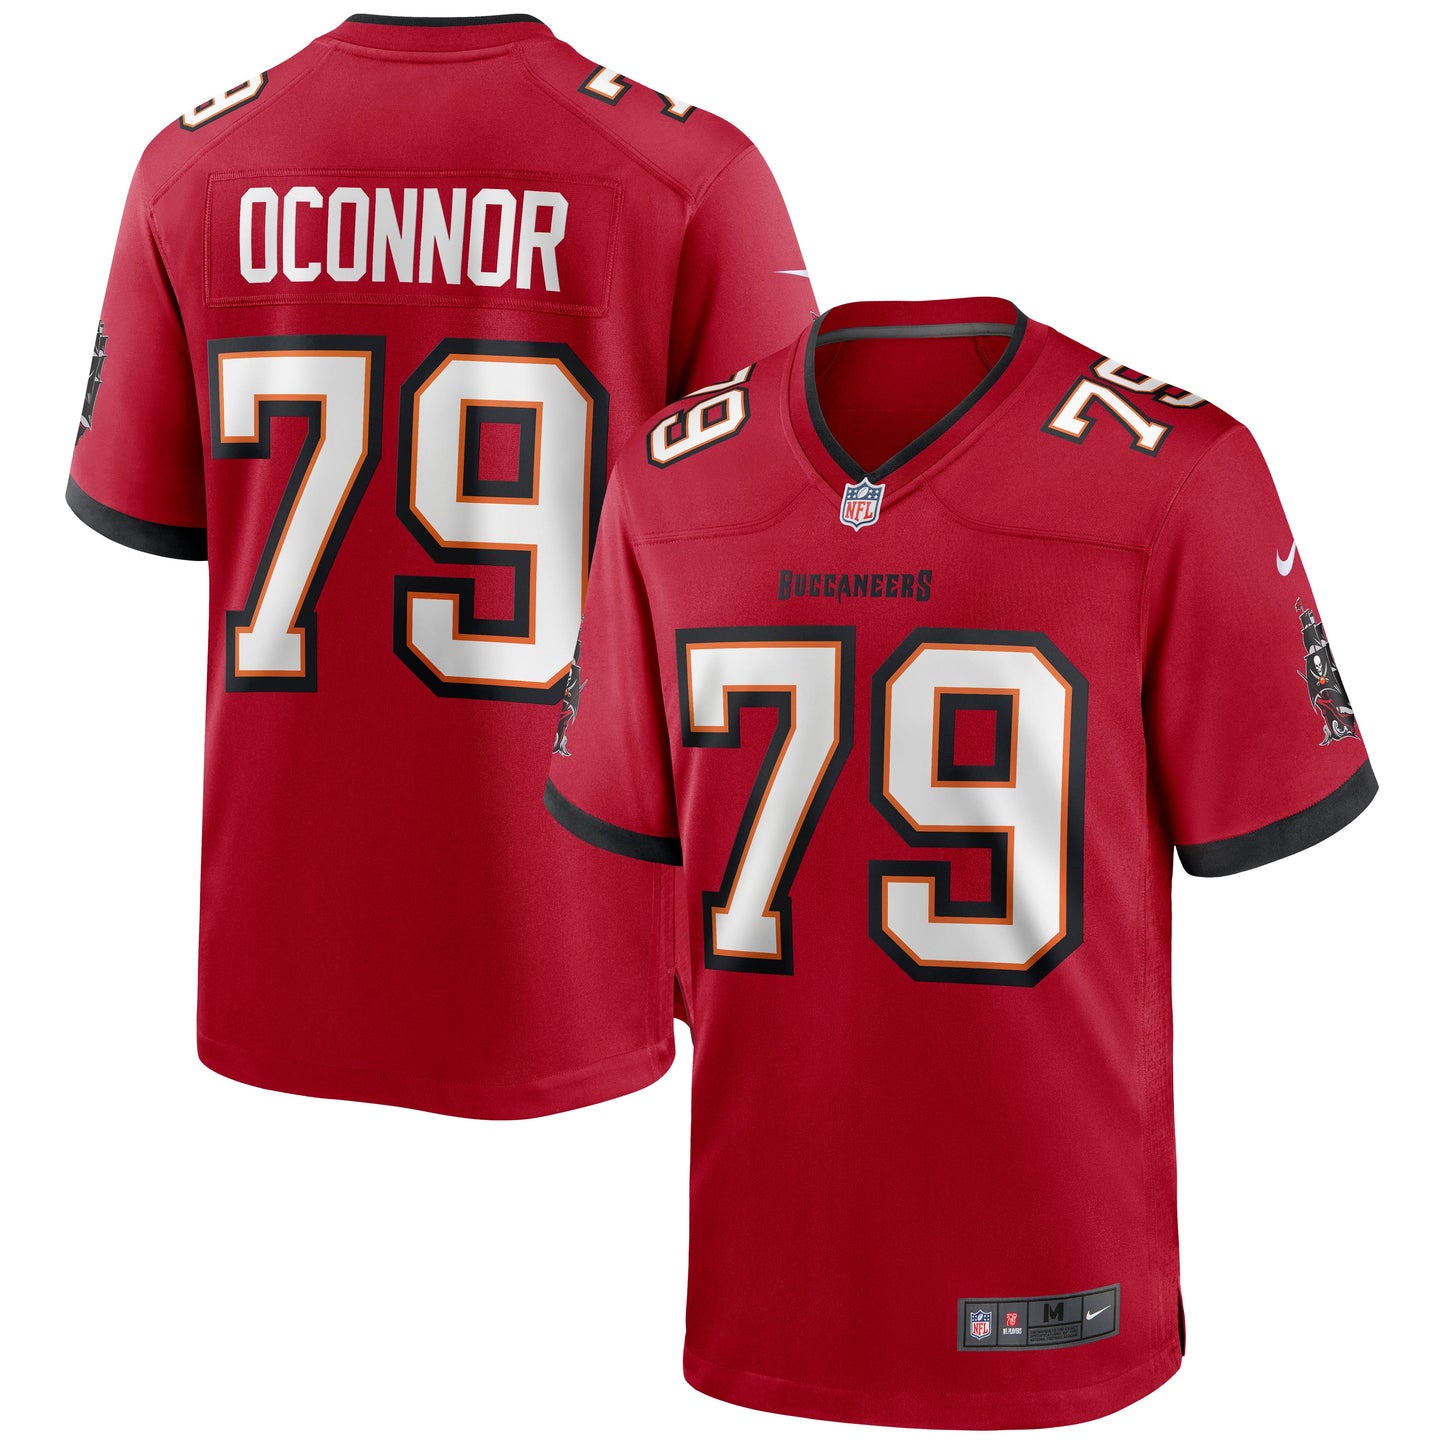 Patrick O'Connor Tampa Bay Buccaneers Nike Game Jersey - Red